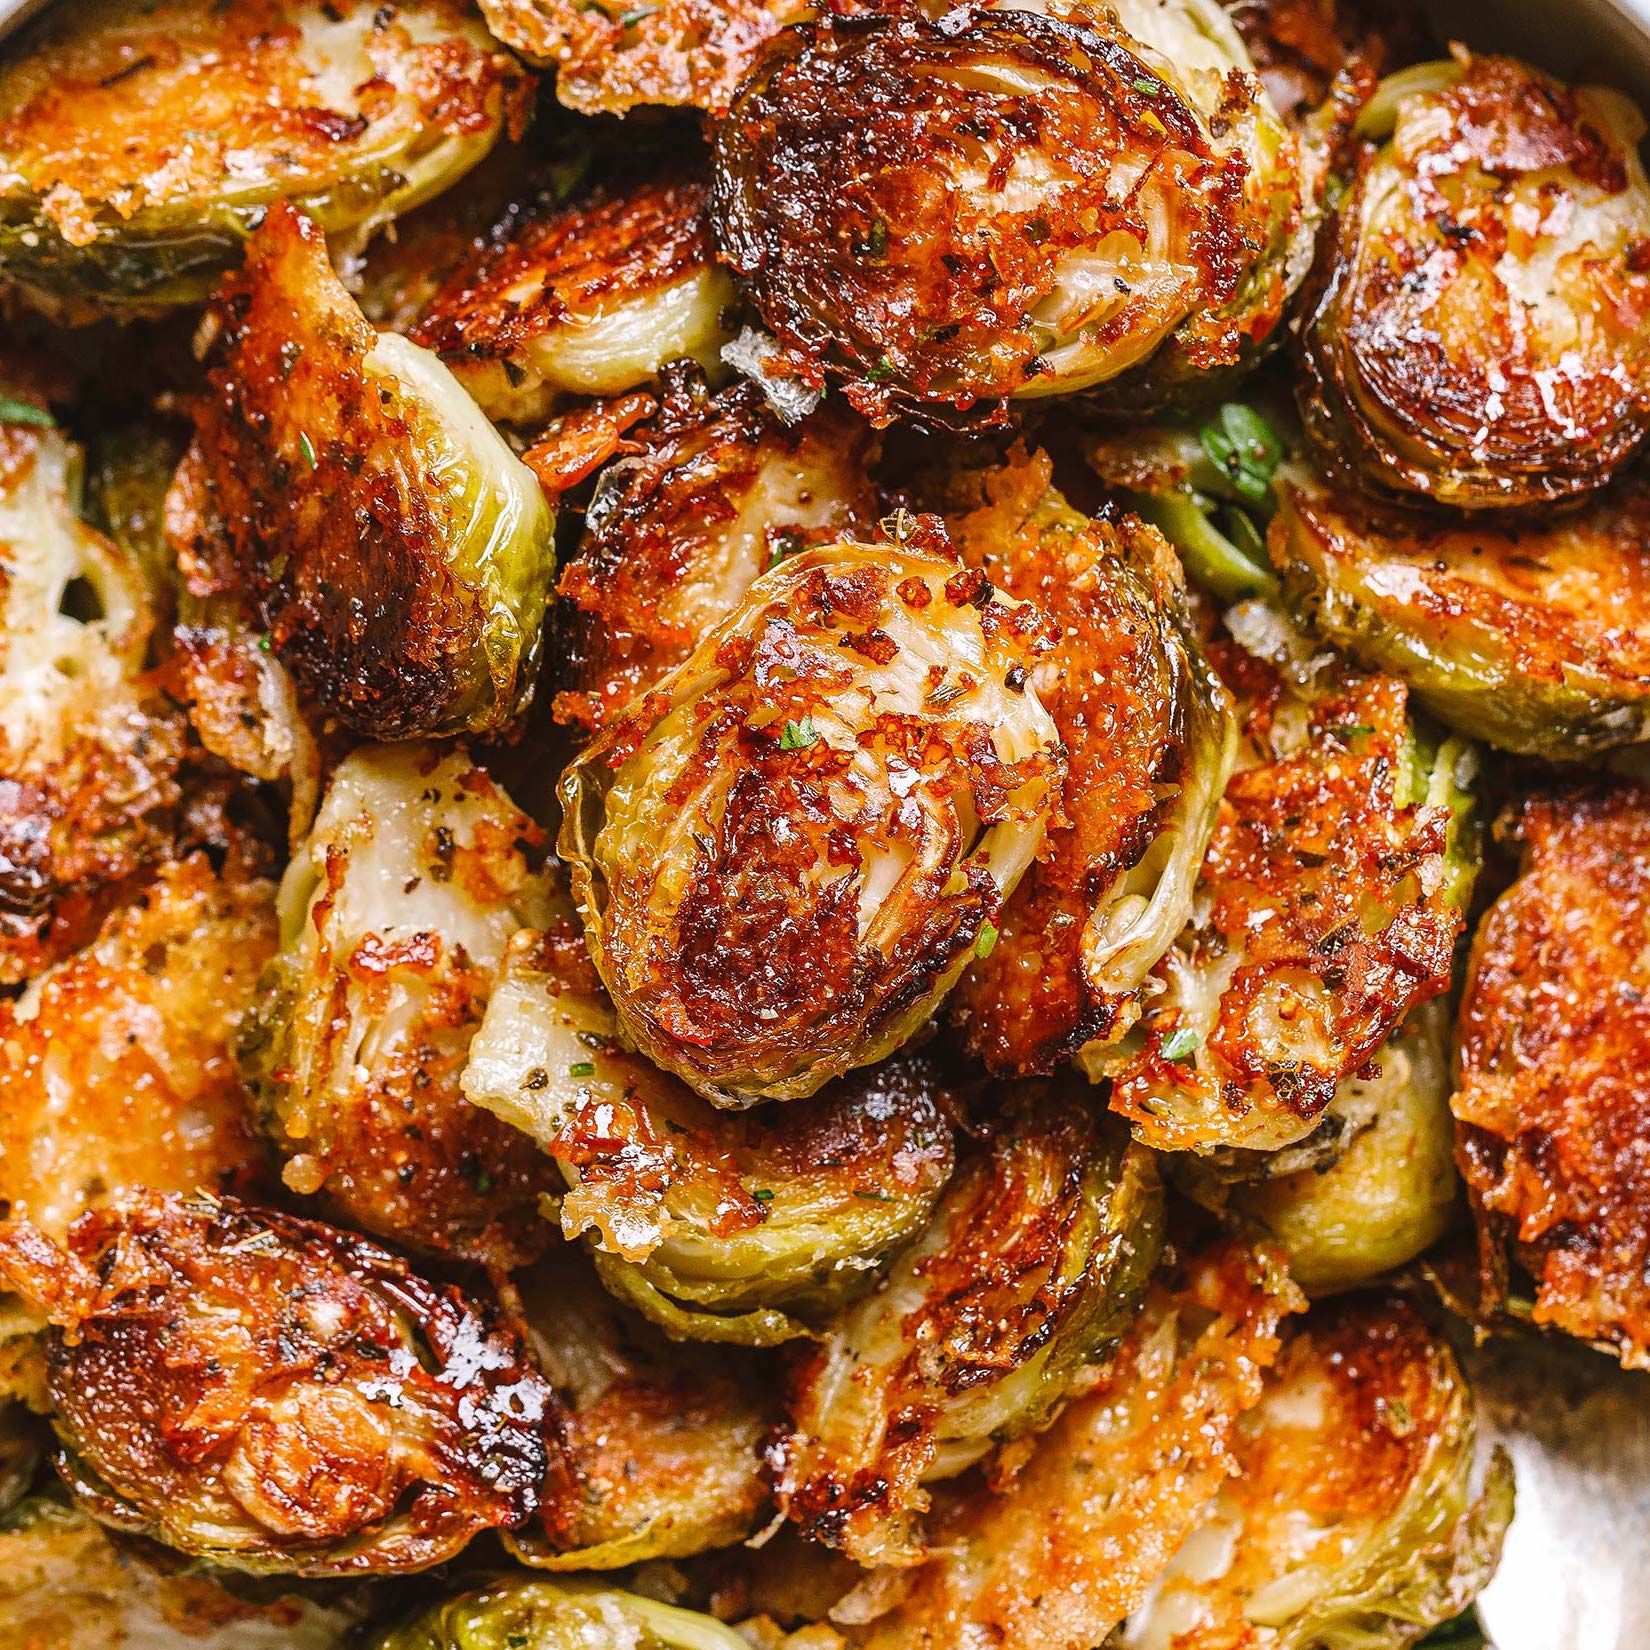 Billy's Roasted Brussel Sprouts